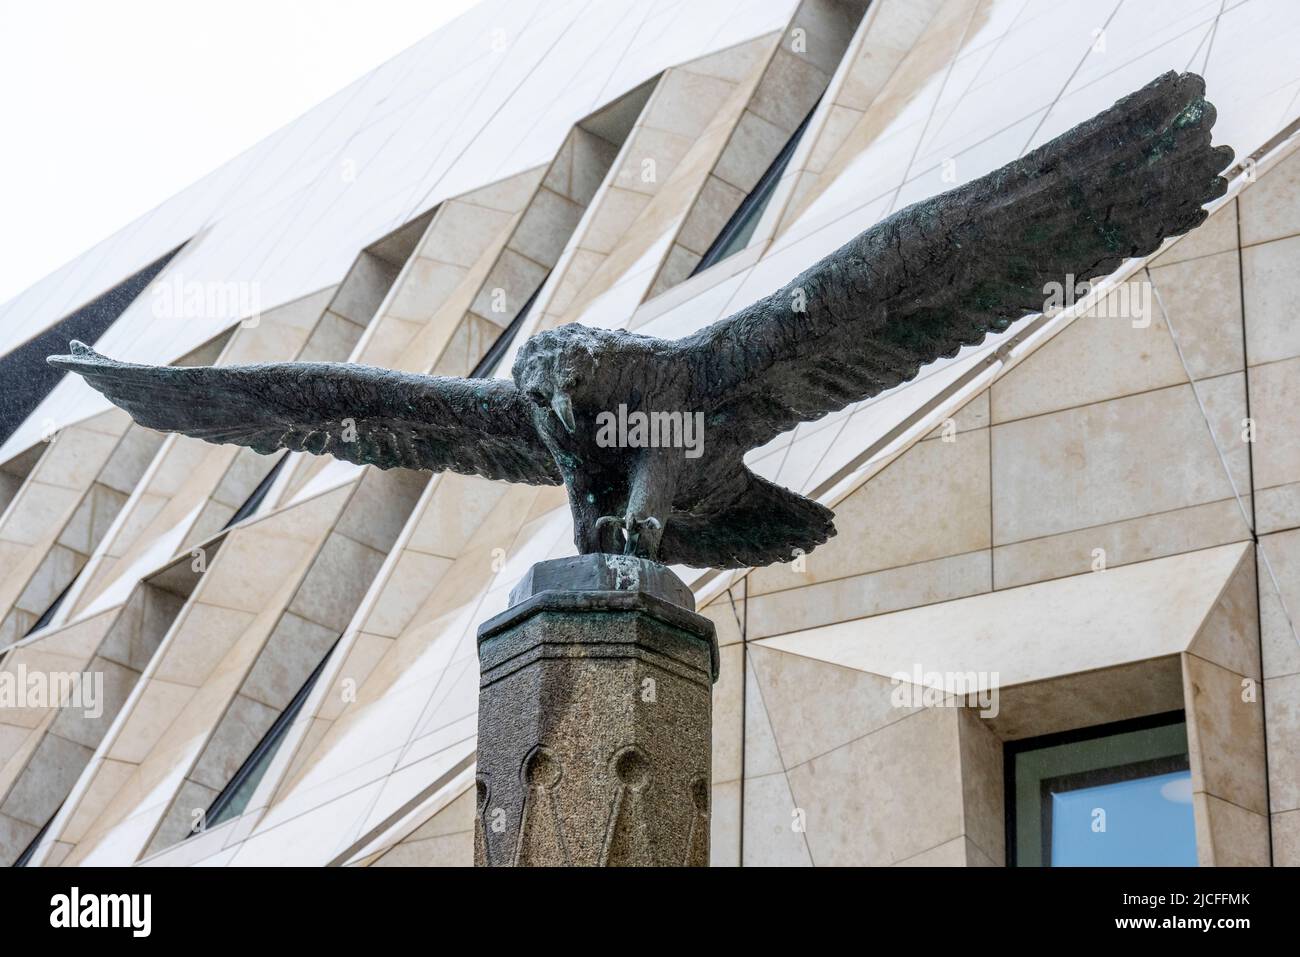 Norway, Nordland, Bodø, eagle sculpture in front of the city hall. Stock Photo